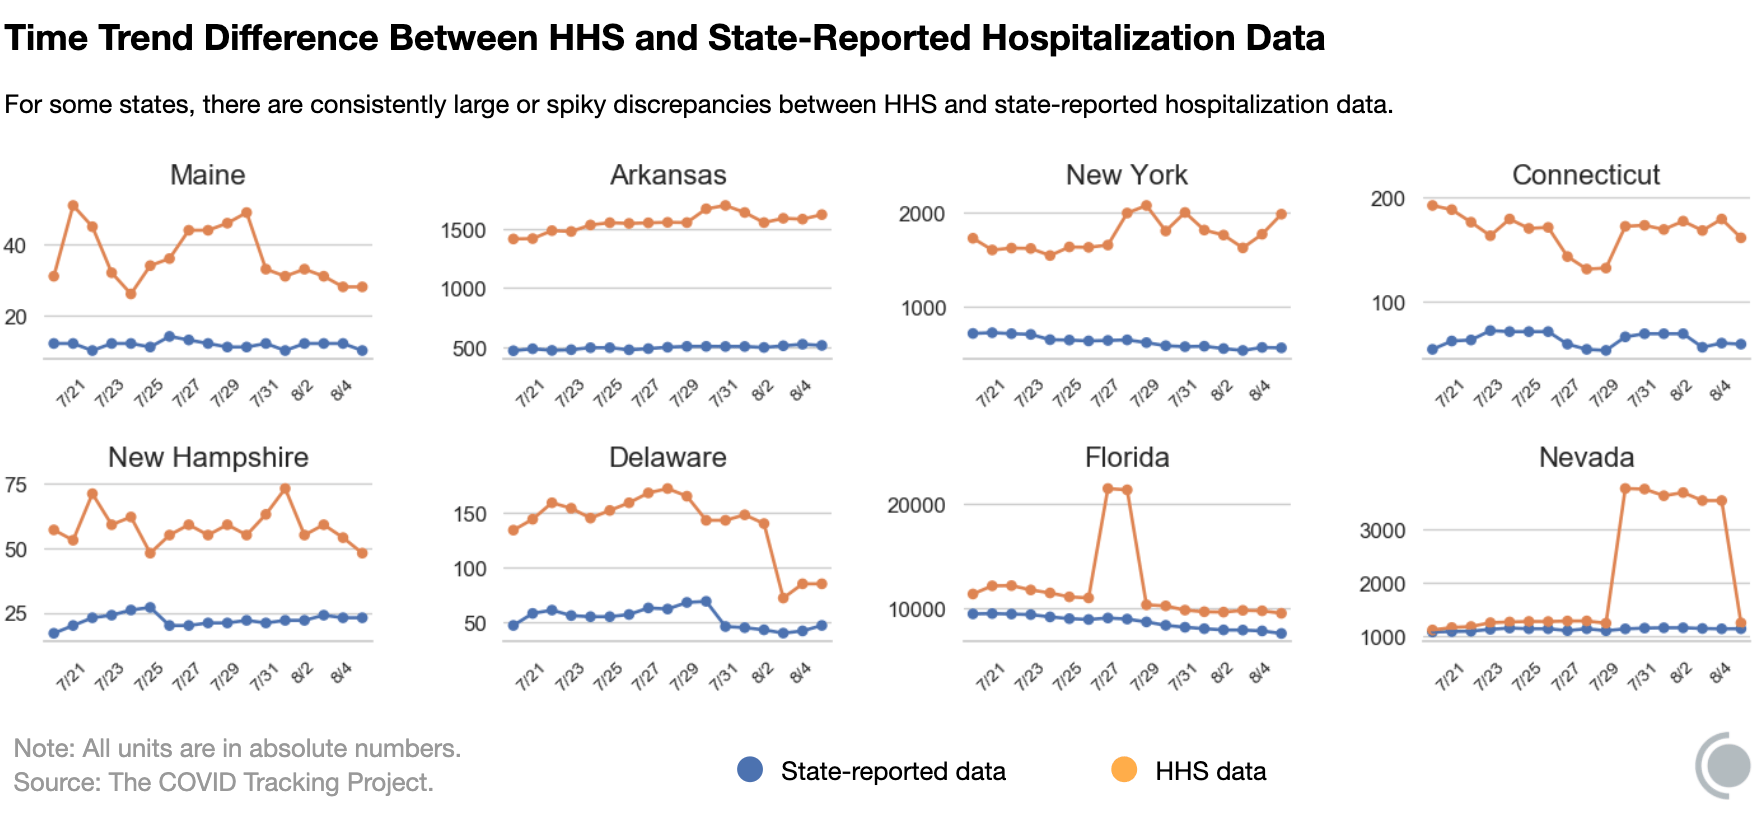 Chart showing difference by state over time between HHS and state-reported hospitalization data